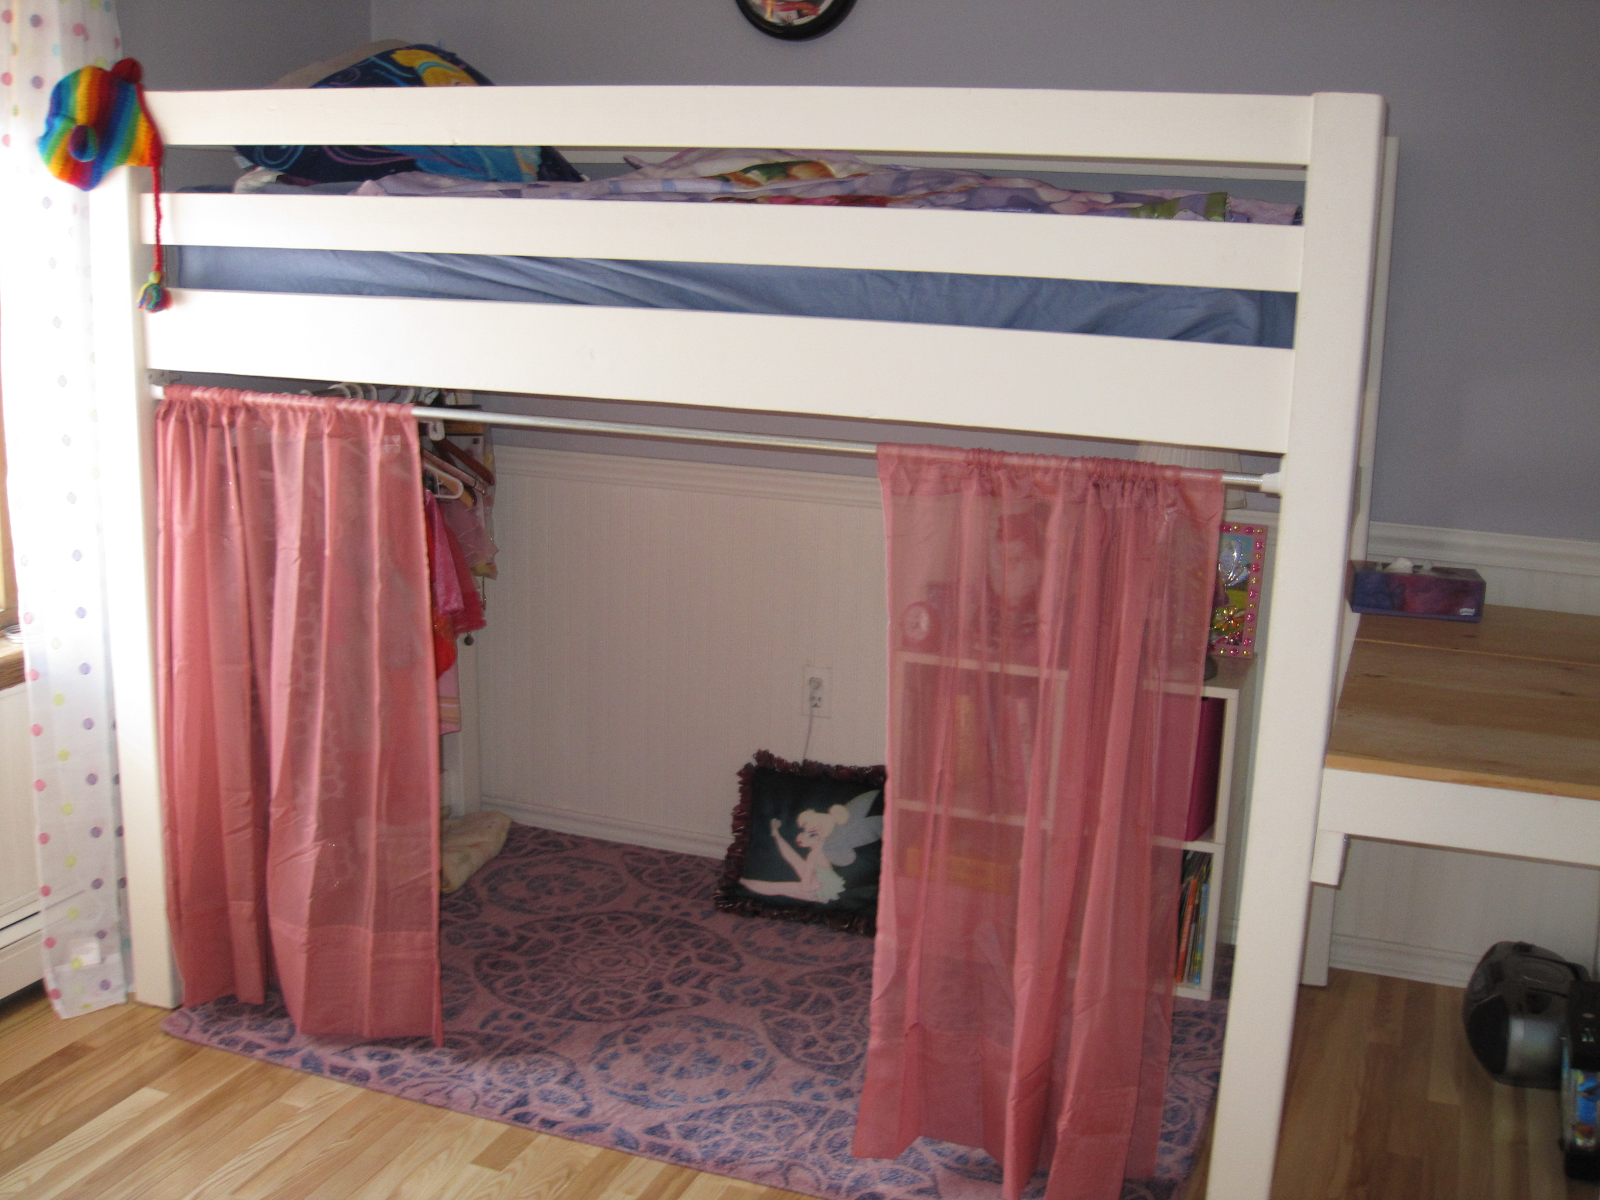 Space Below Your Loft Bed, Bunk Bed With Area Underneath